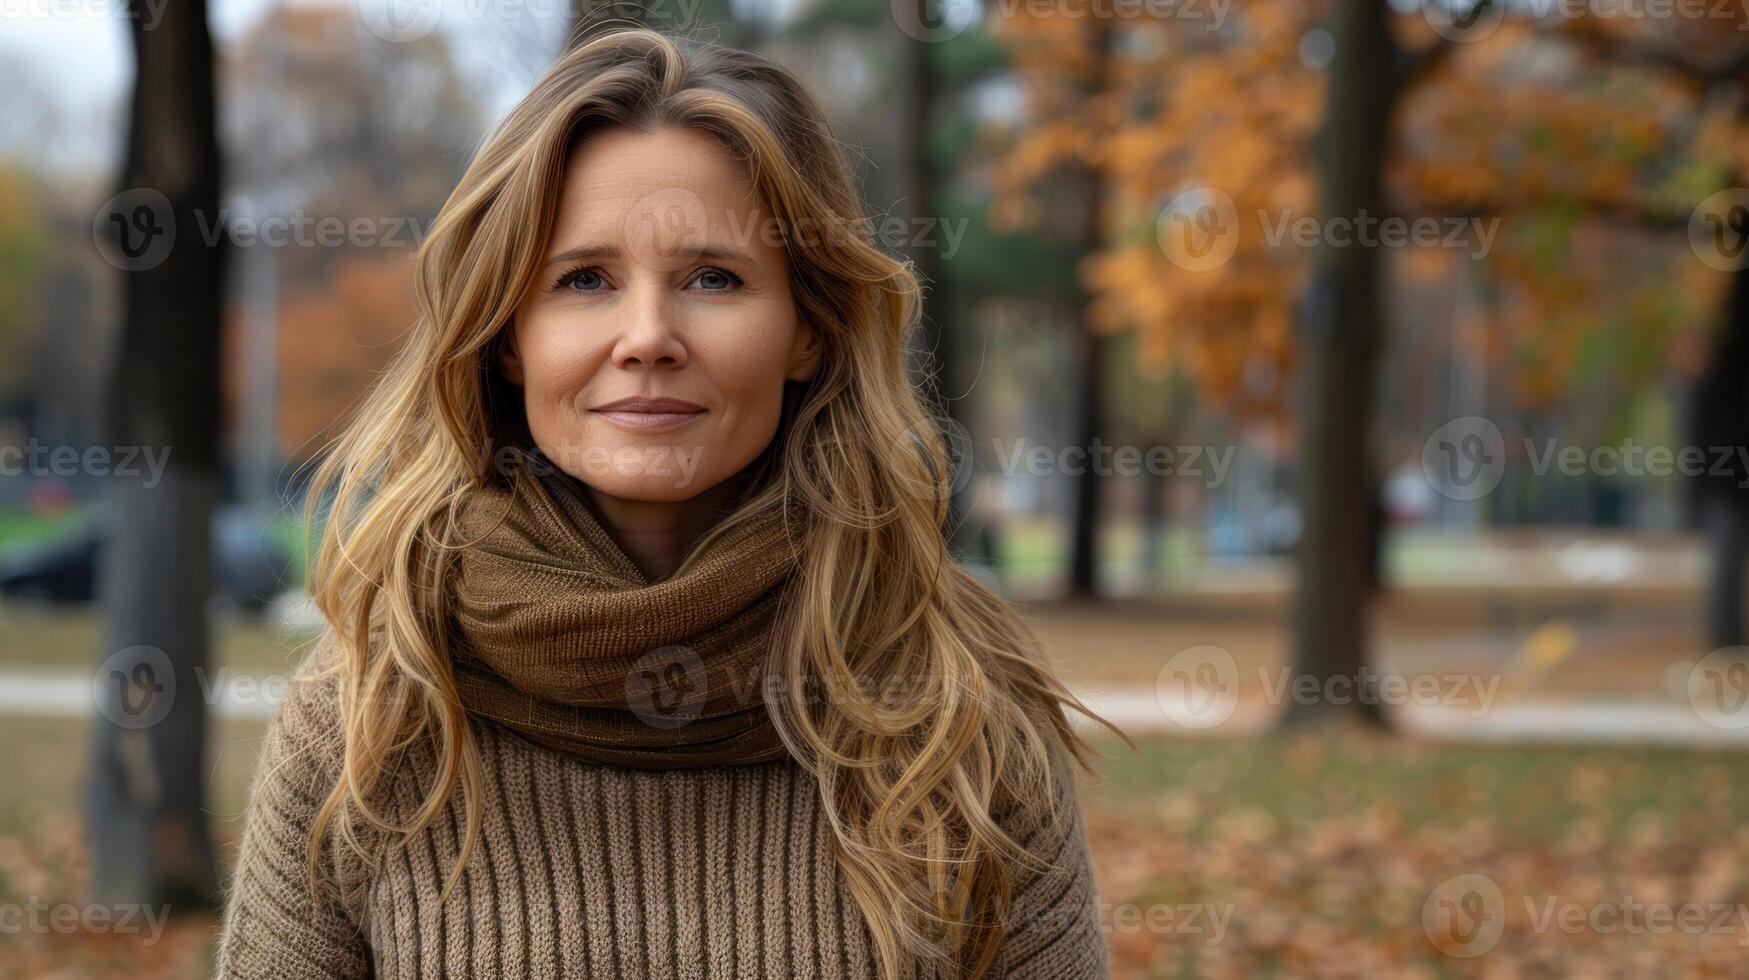 A woman standing outdoors in a park, wearing a scarf around her neck photo